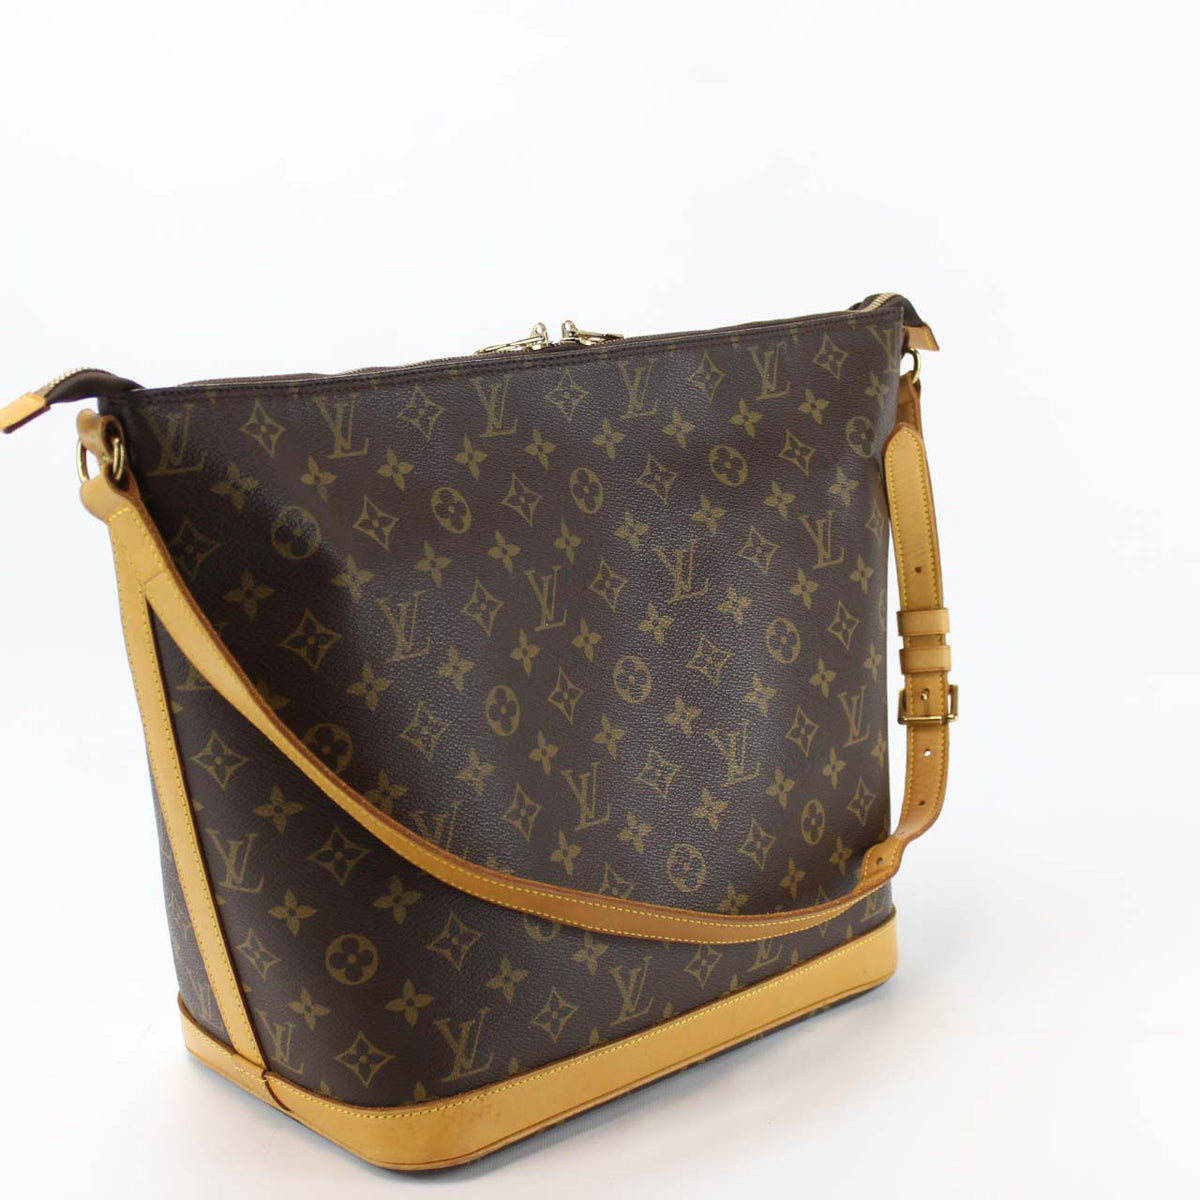 befamousused.official - LOUIS VUITTON Limited Edition Monogram CanVas Amfar  Sharon Stone Bag - Designed and Create by Sharon Stone to rais money for  the AMFAR foundation which goes to AIDs research . .